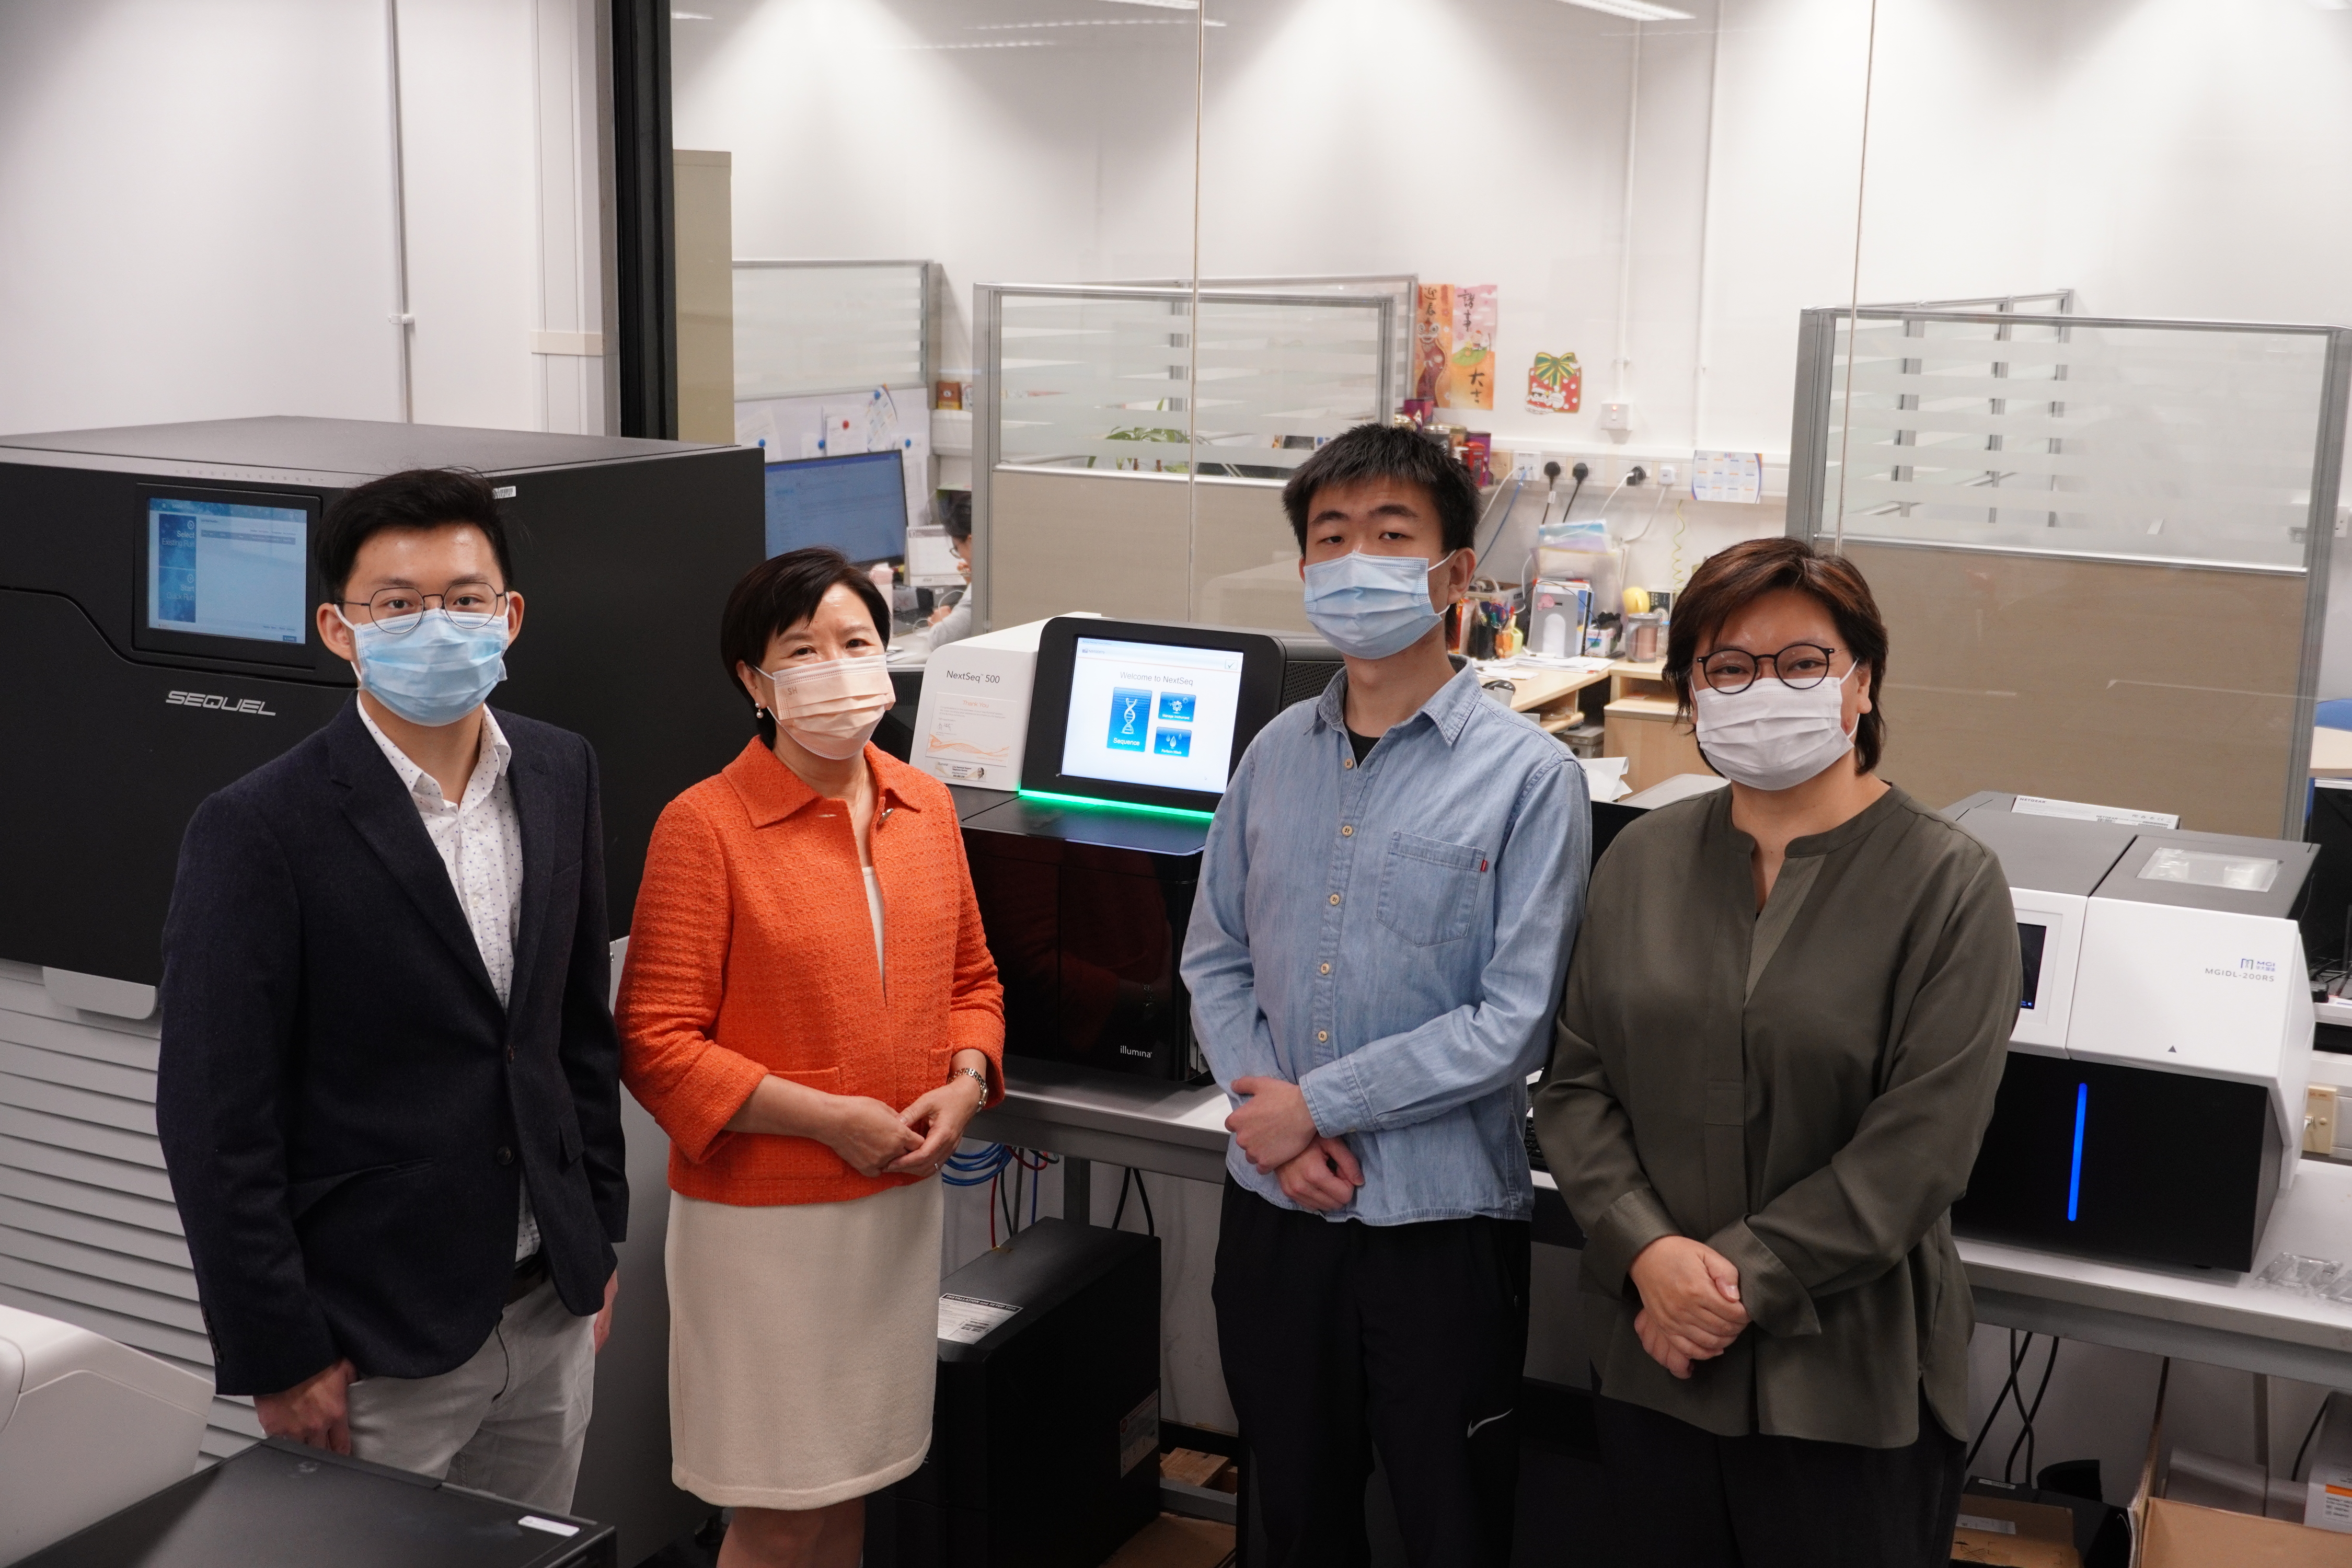 Prof. Ip and her research team